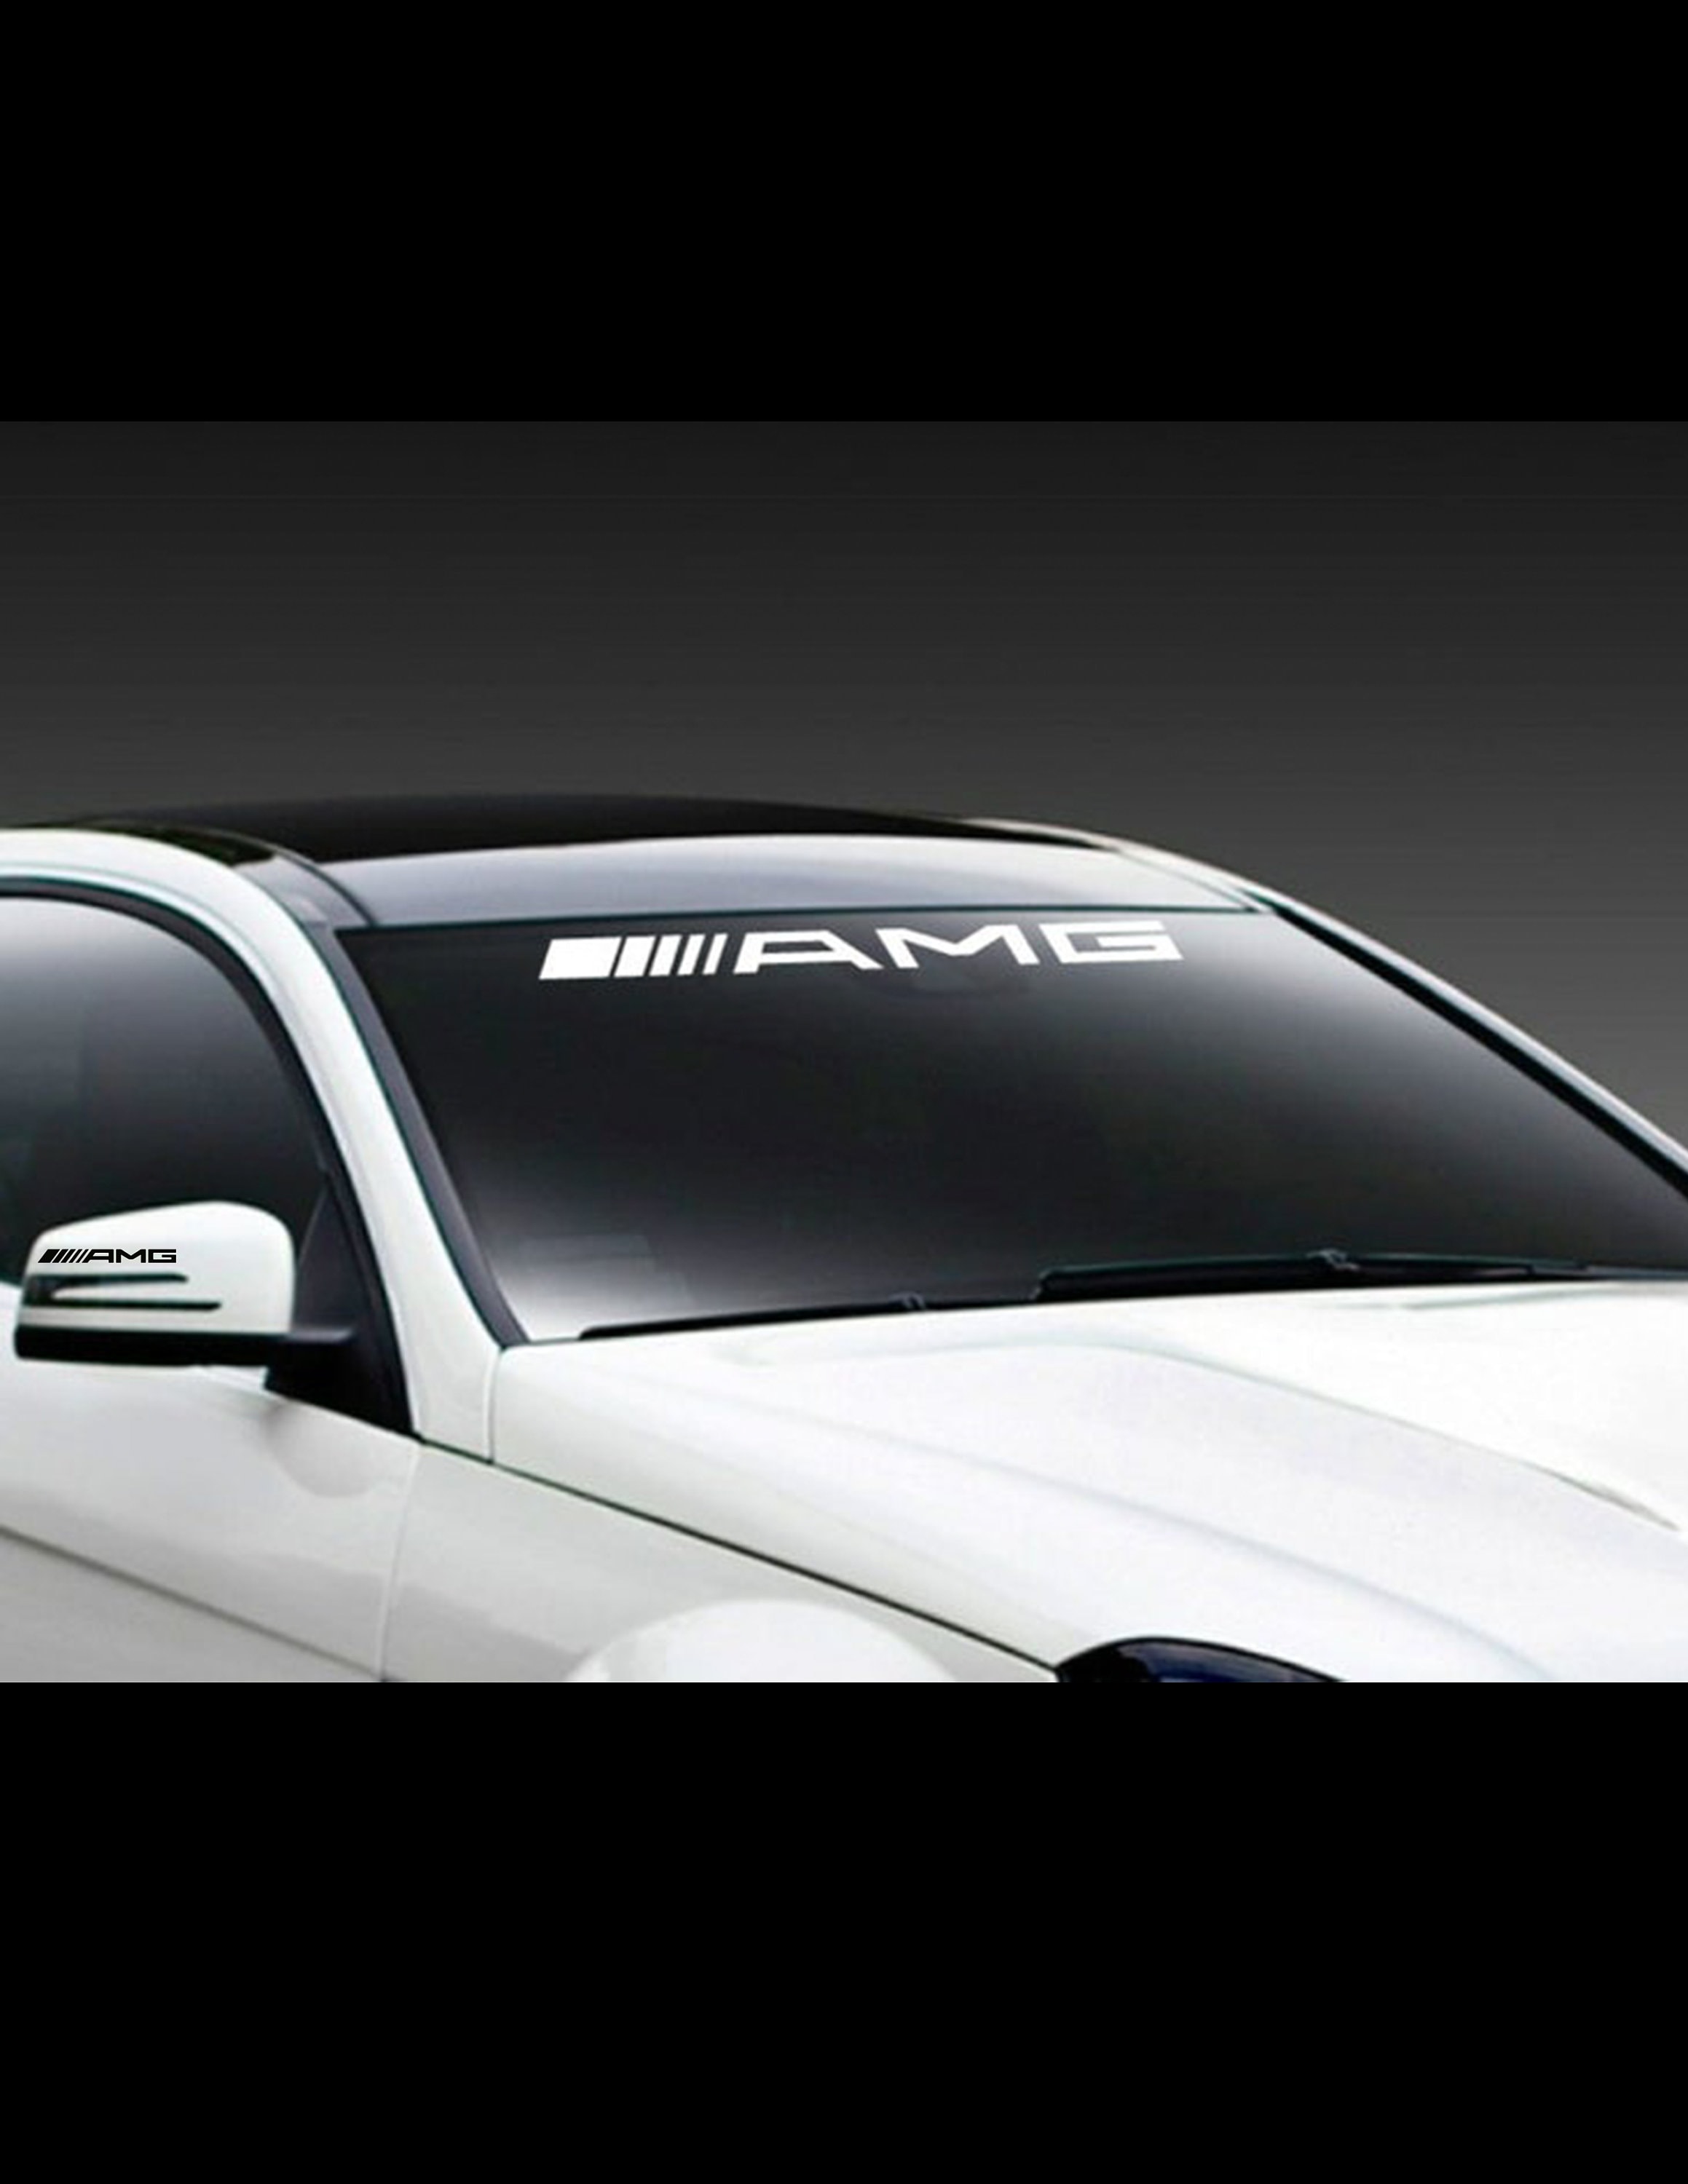 1 x AMG Sticker for Windshield or Back Window - White 